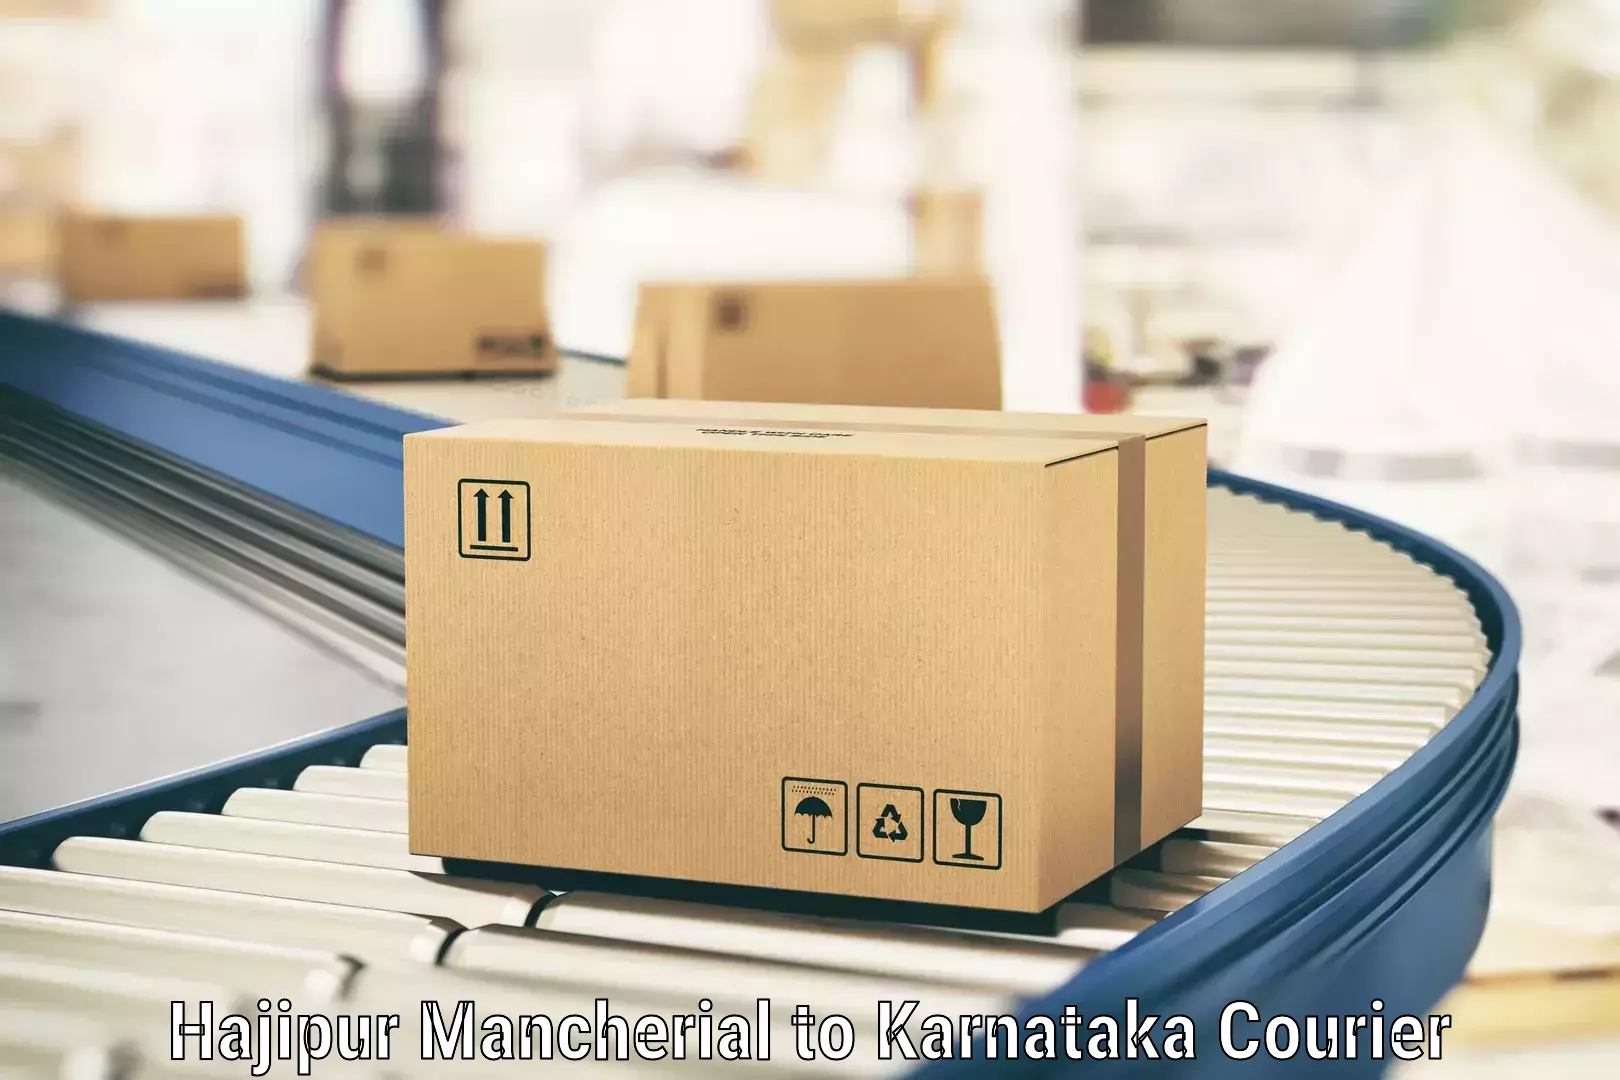 Multi-national courier services Hajipur Mancherial to Banavara